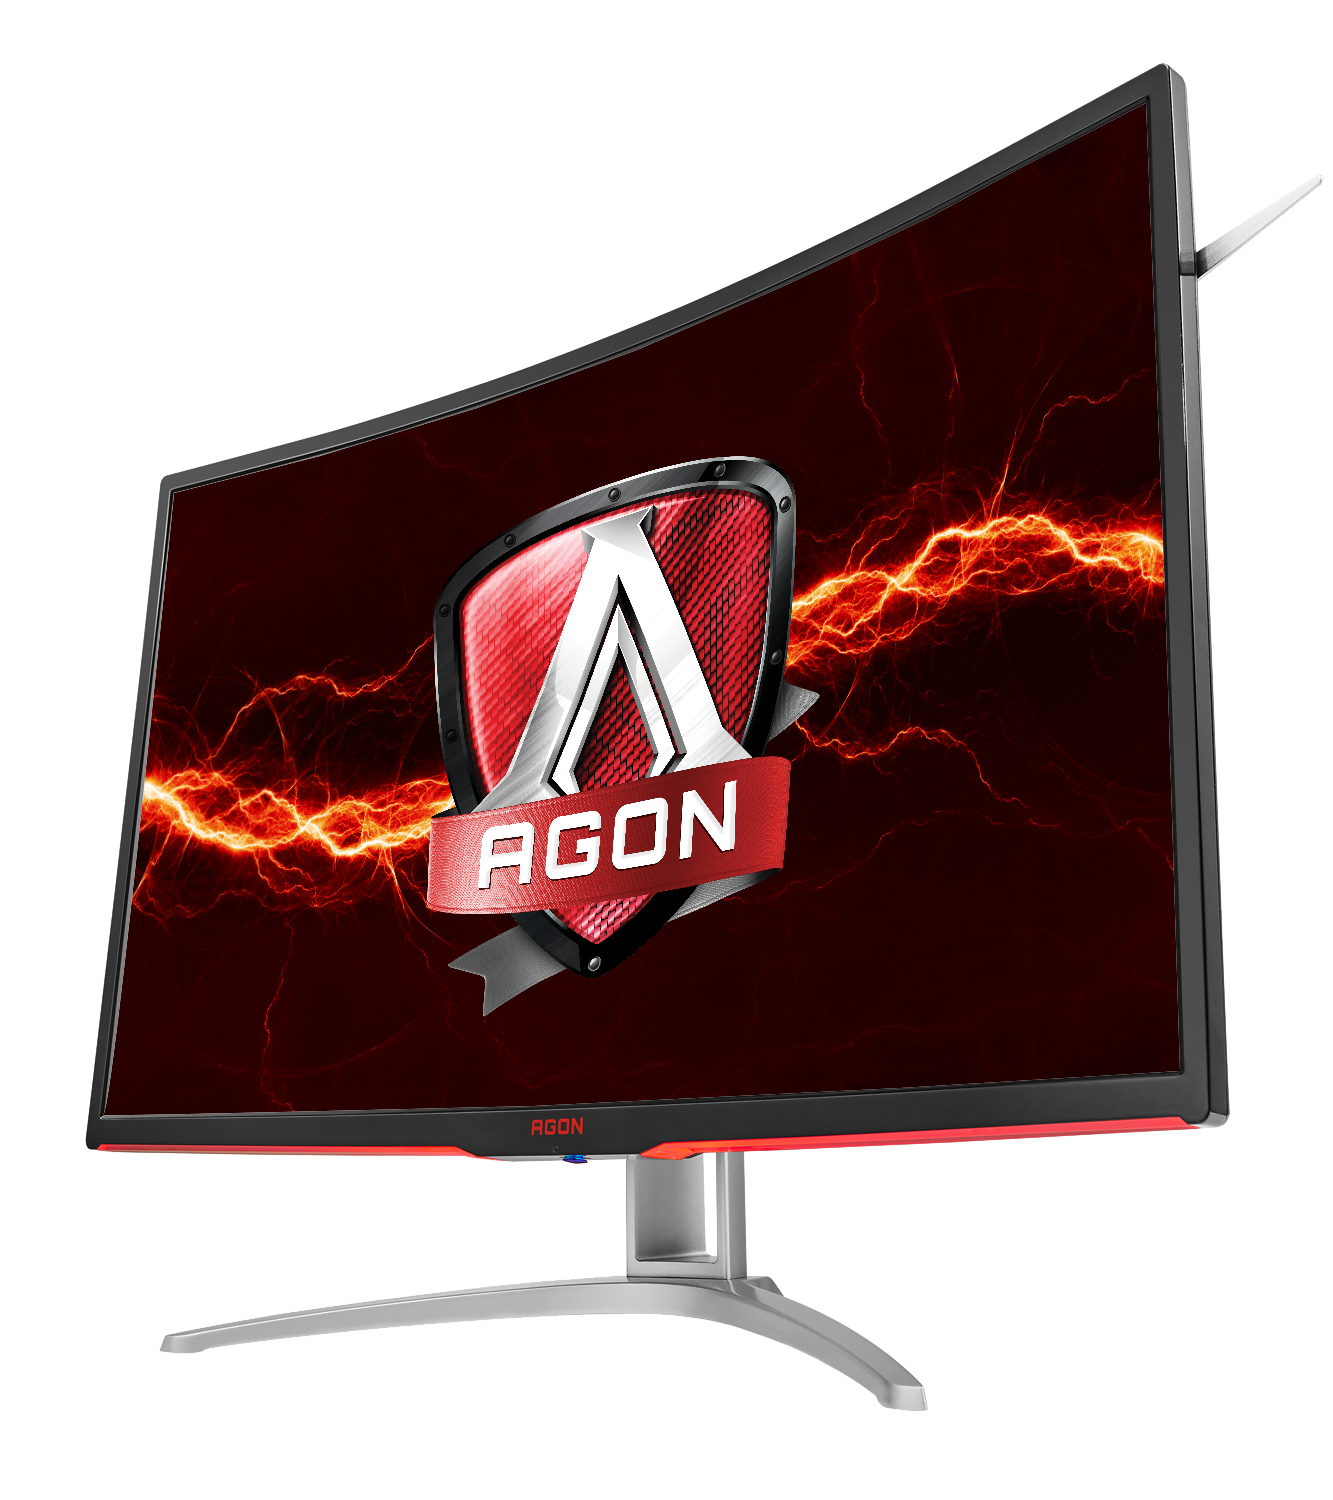 AOC unveils the AGON QHD curved gaming monitor with support for